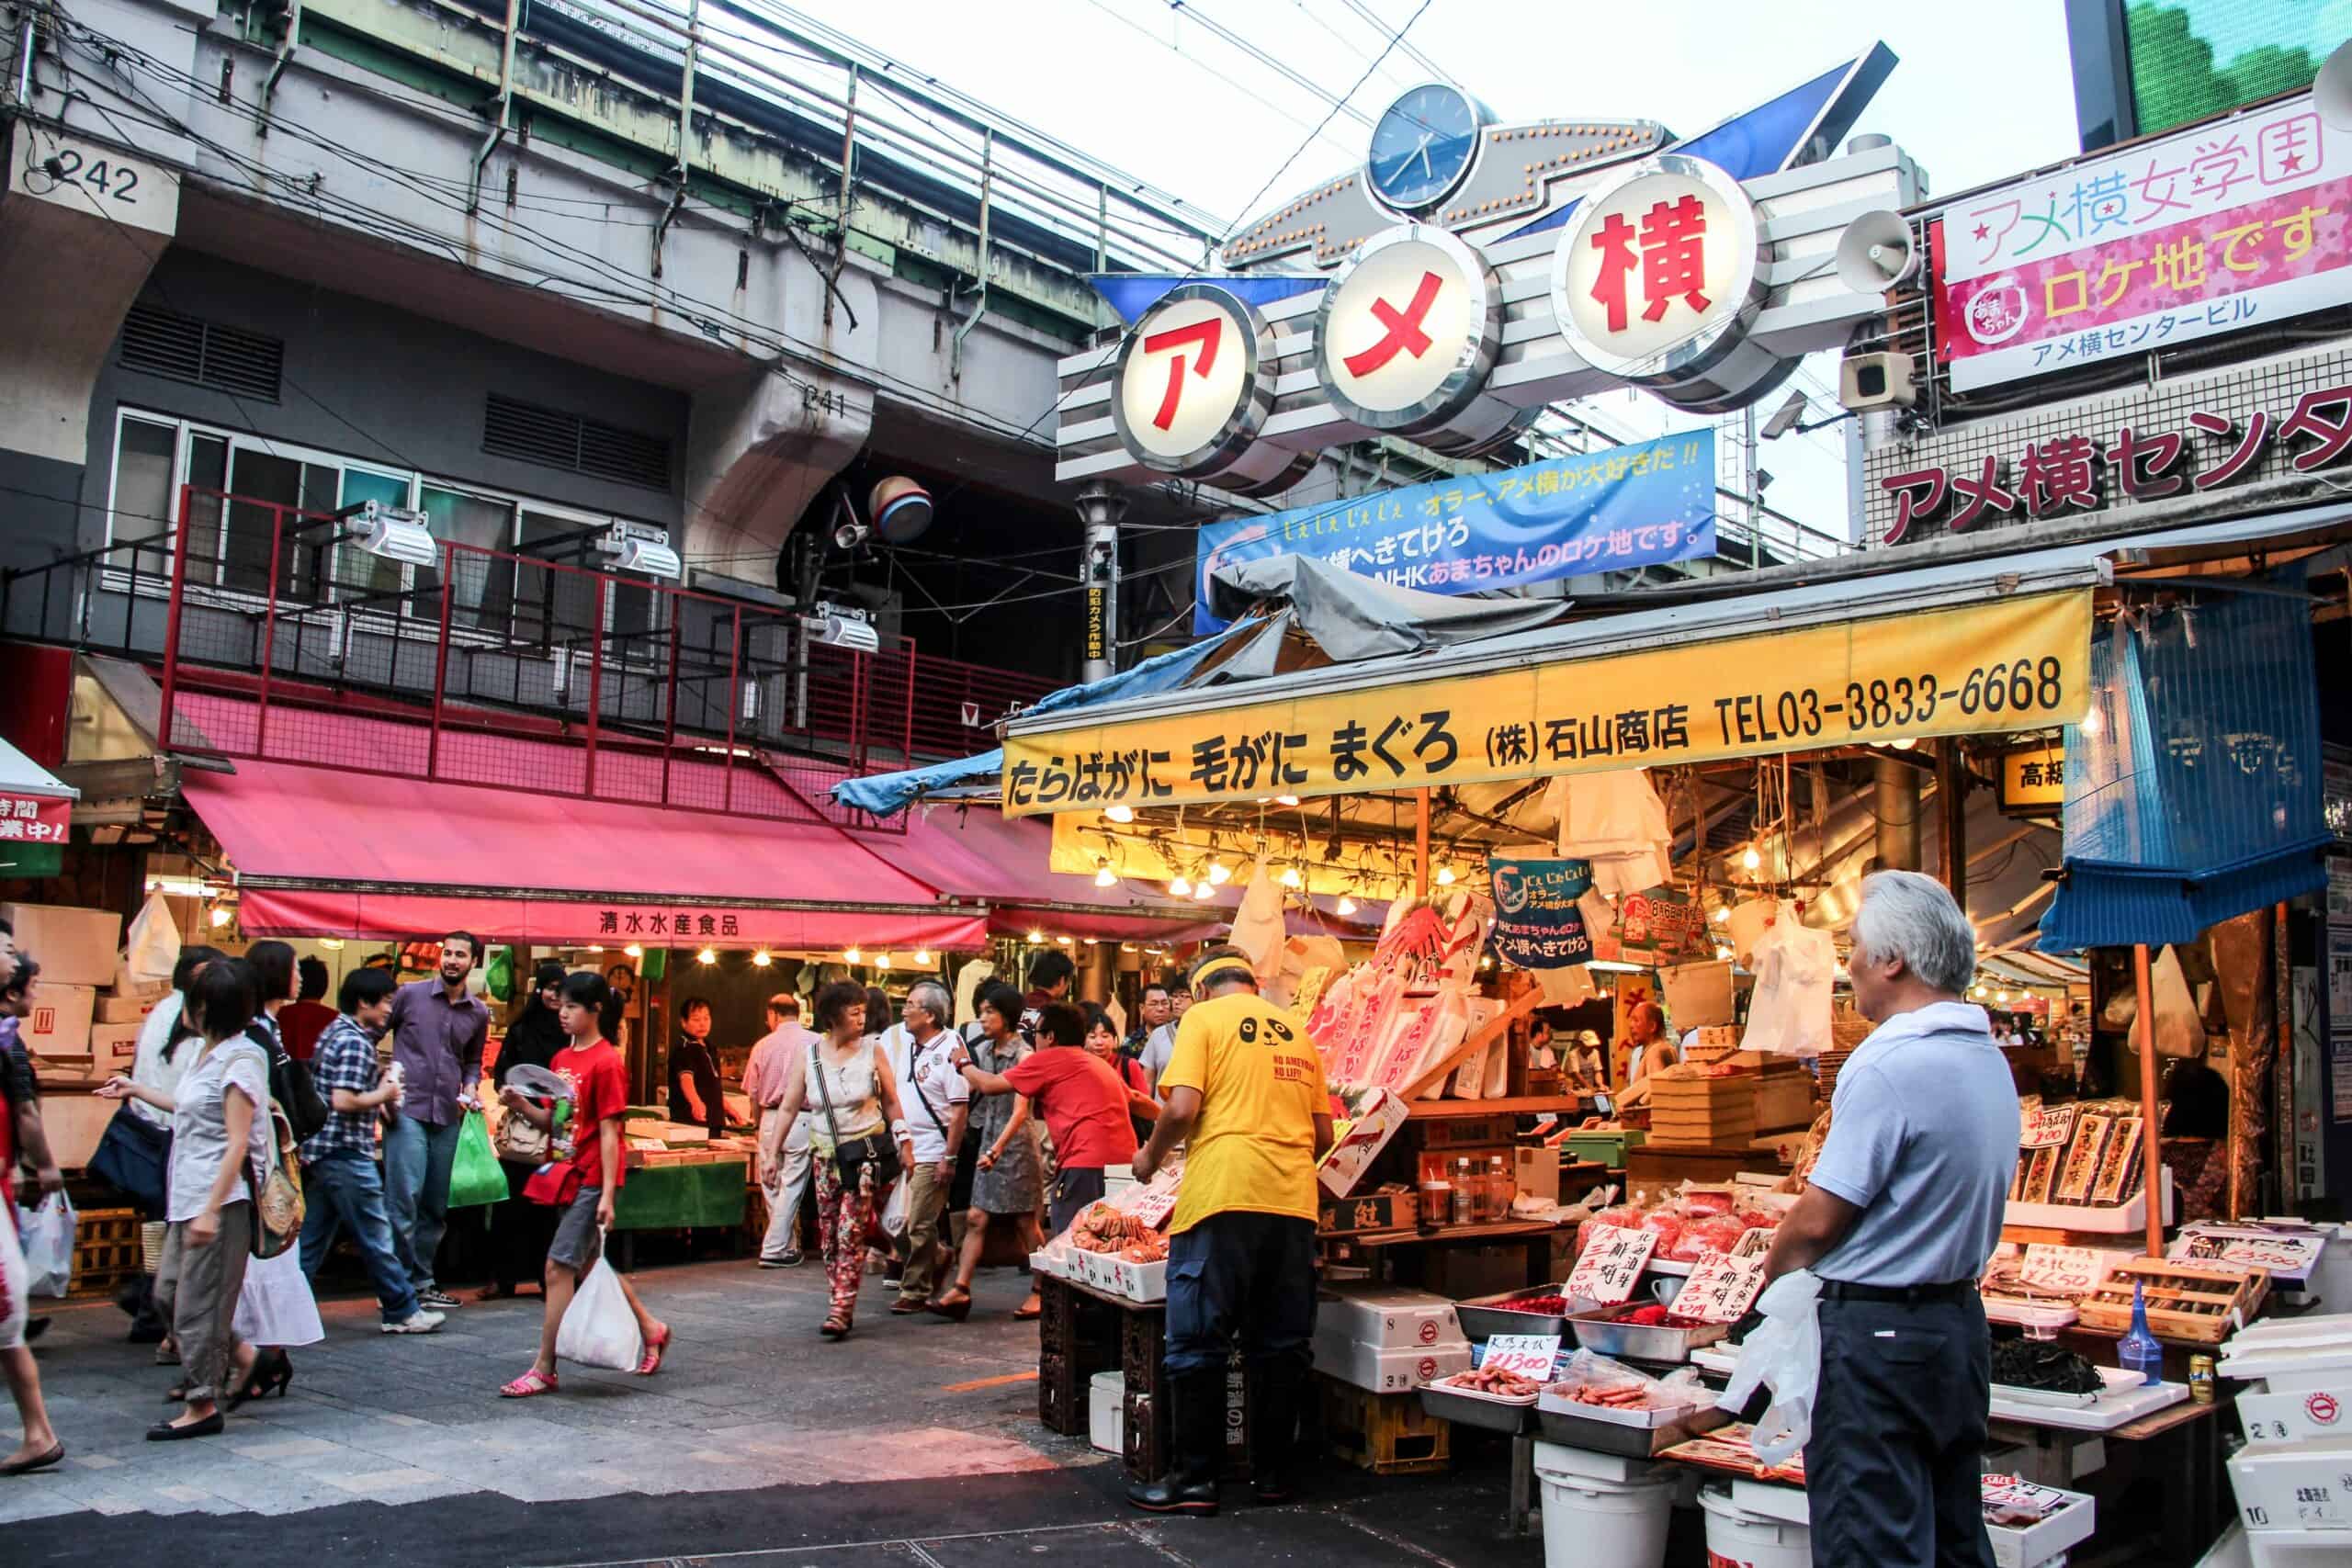 A busy street market with yellow and red shop fronts under a railway arch in Tokyo, Japan.